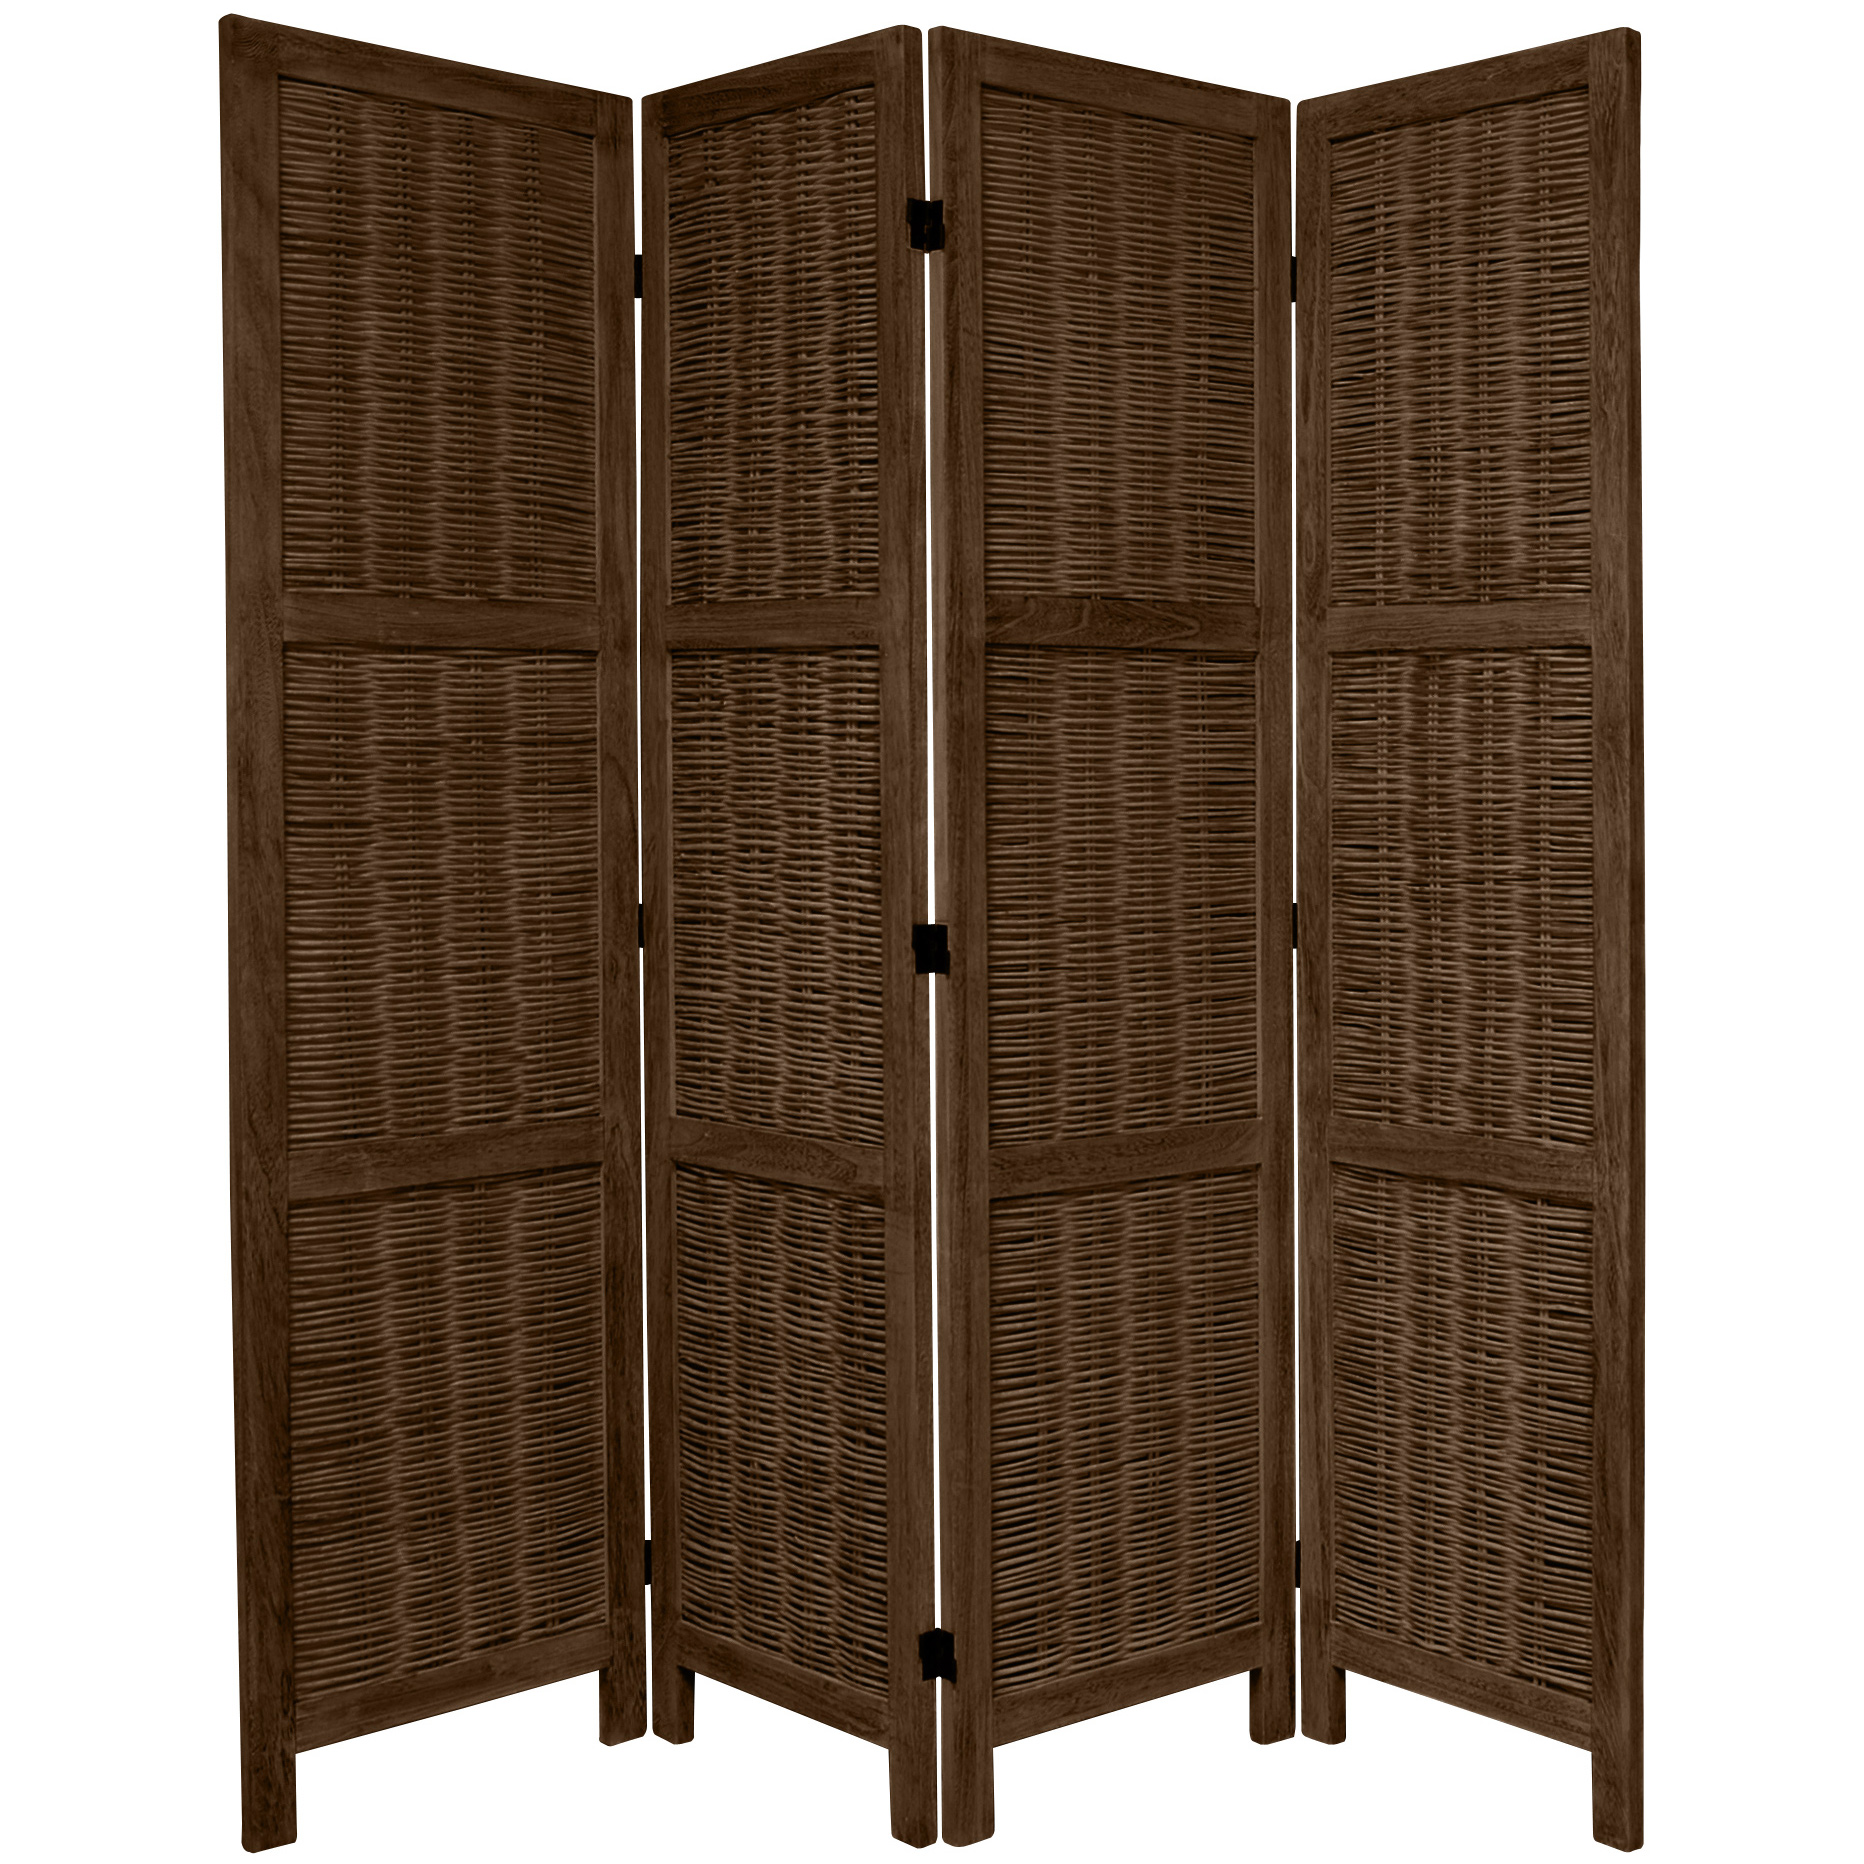 Oriental Furniture 5 1/2 ft. Tall Bamboo Matchstick Screen - Brown - 4 Panel - image 1 of 3